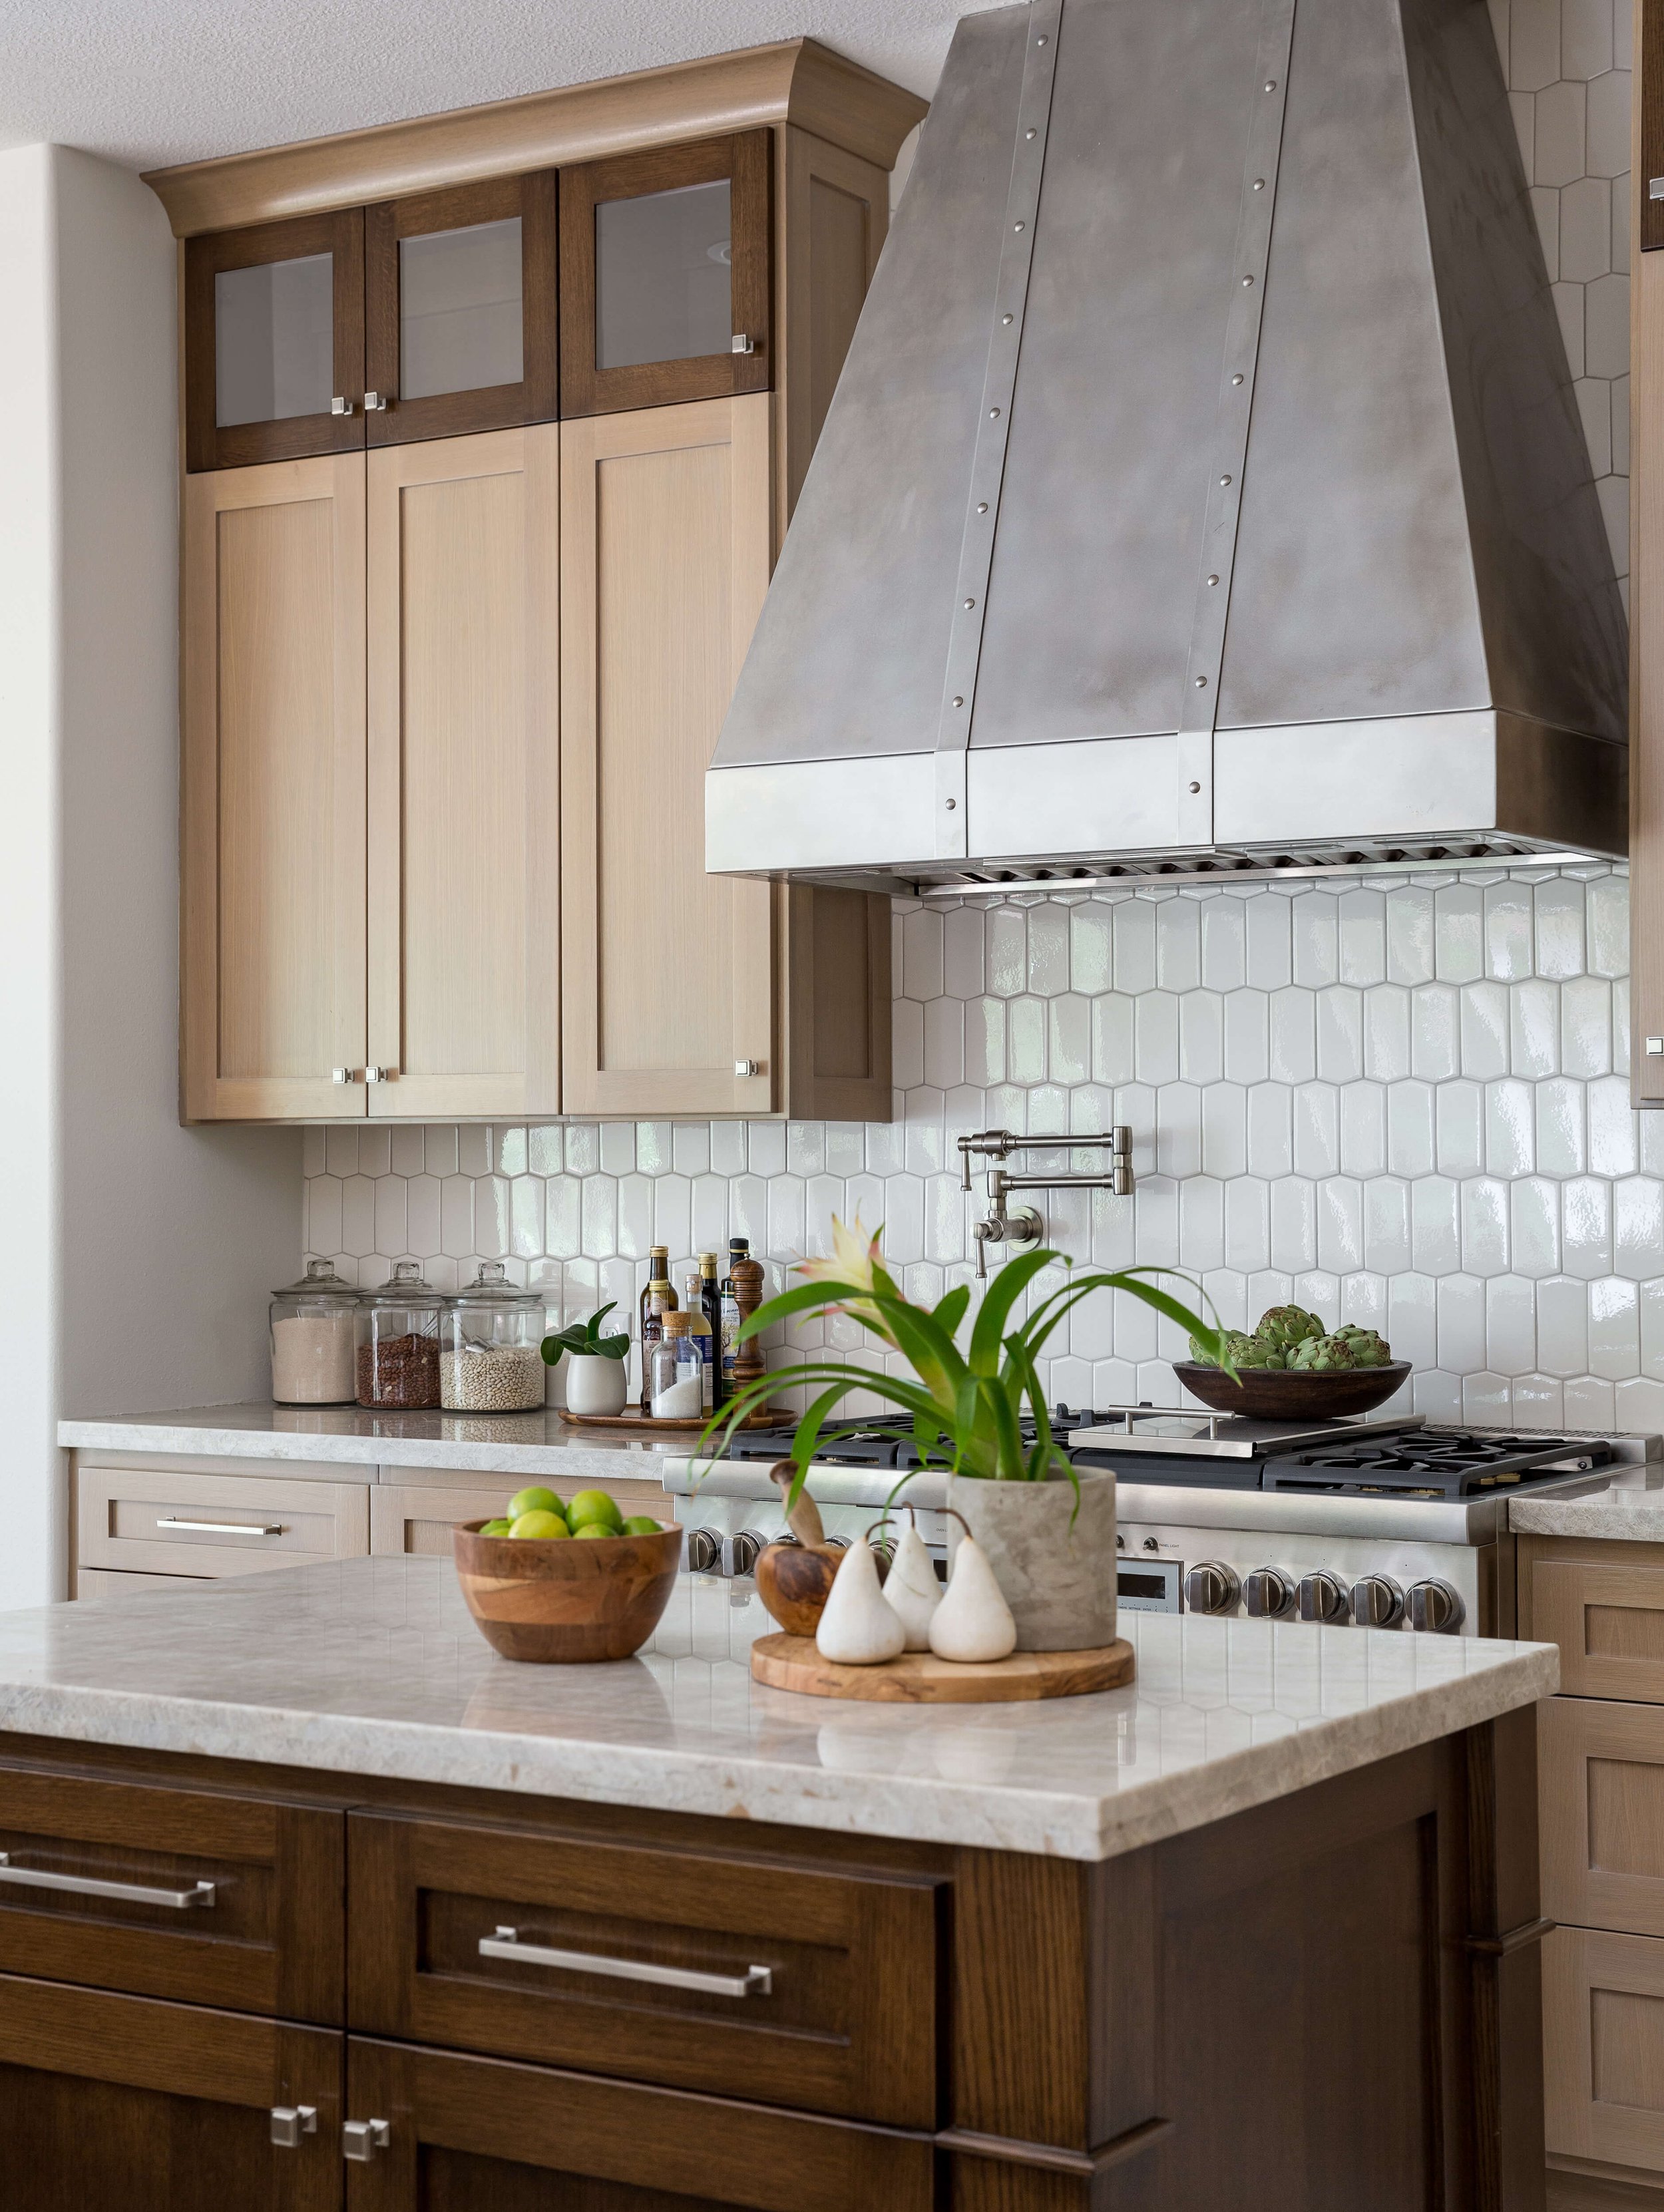 What's the Best Size Wood Range Hood to Use?